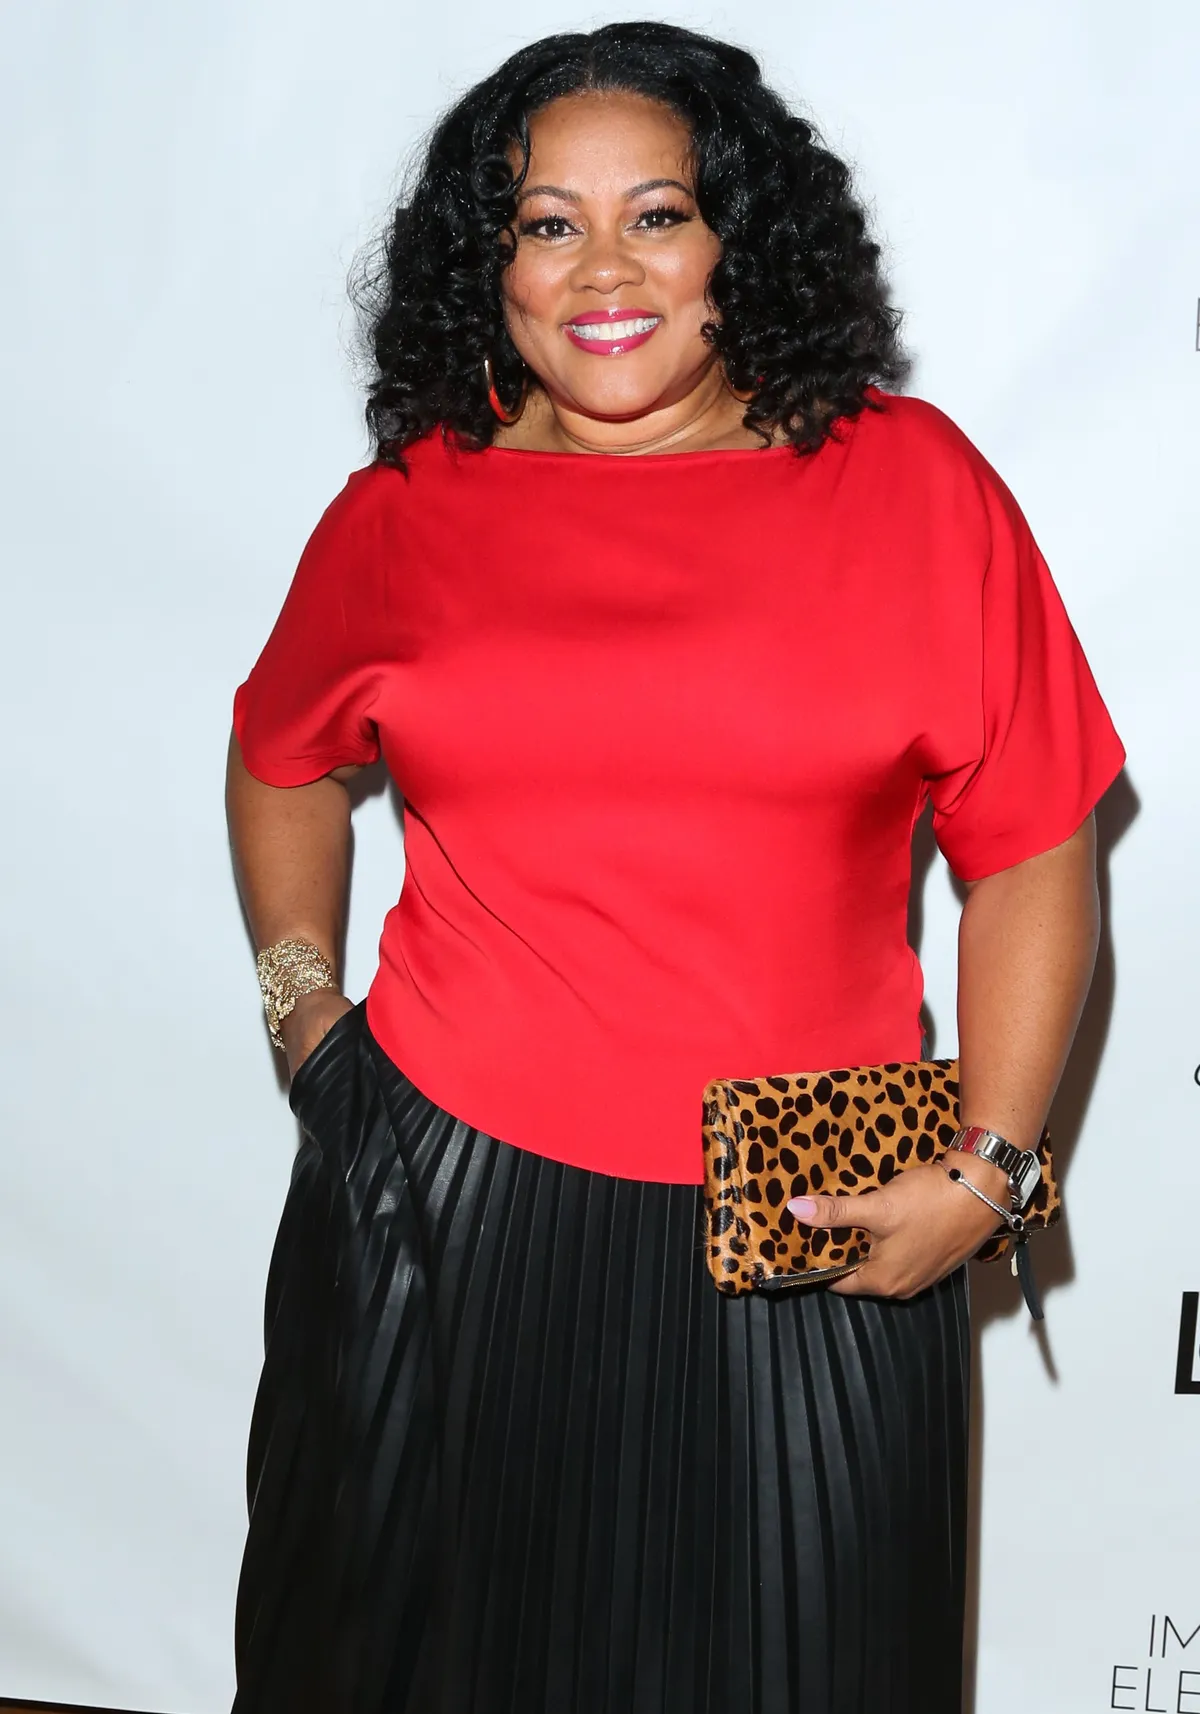 Lela Rochon attends the release party for the book "Every Day I'm Hustling" at Rain Bar and Lounge in Studio City, California on April 8, 2018. | Photo: Getty Images